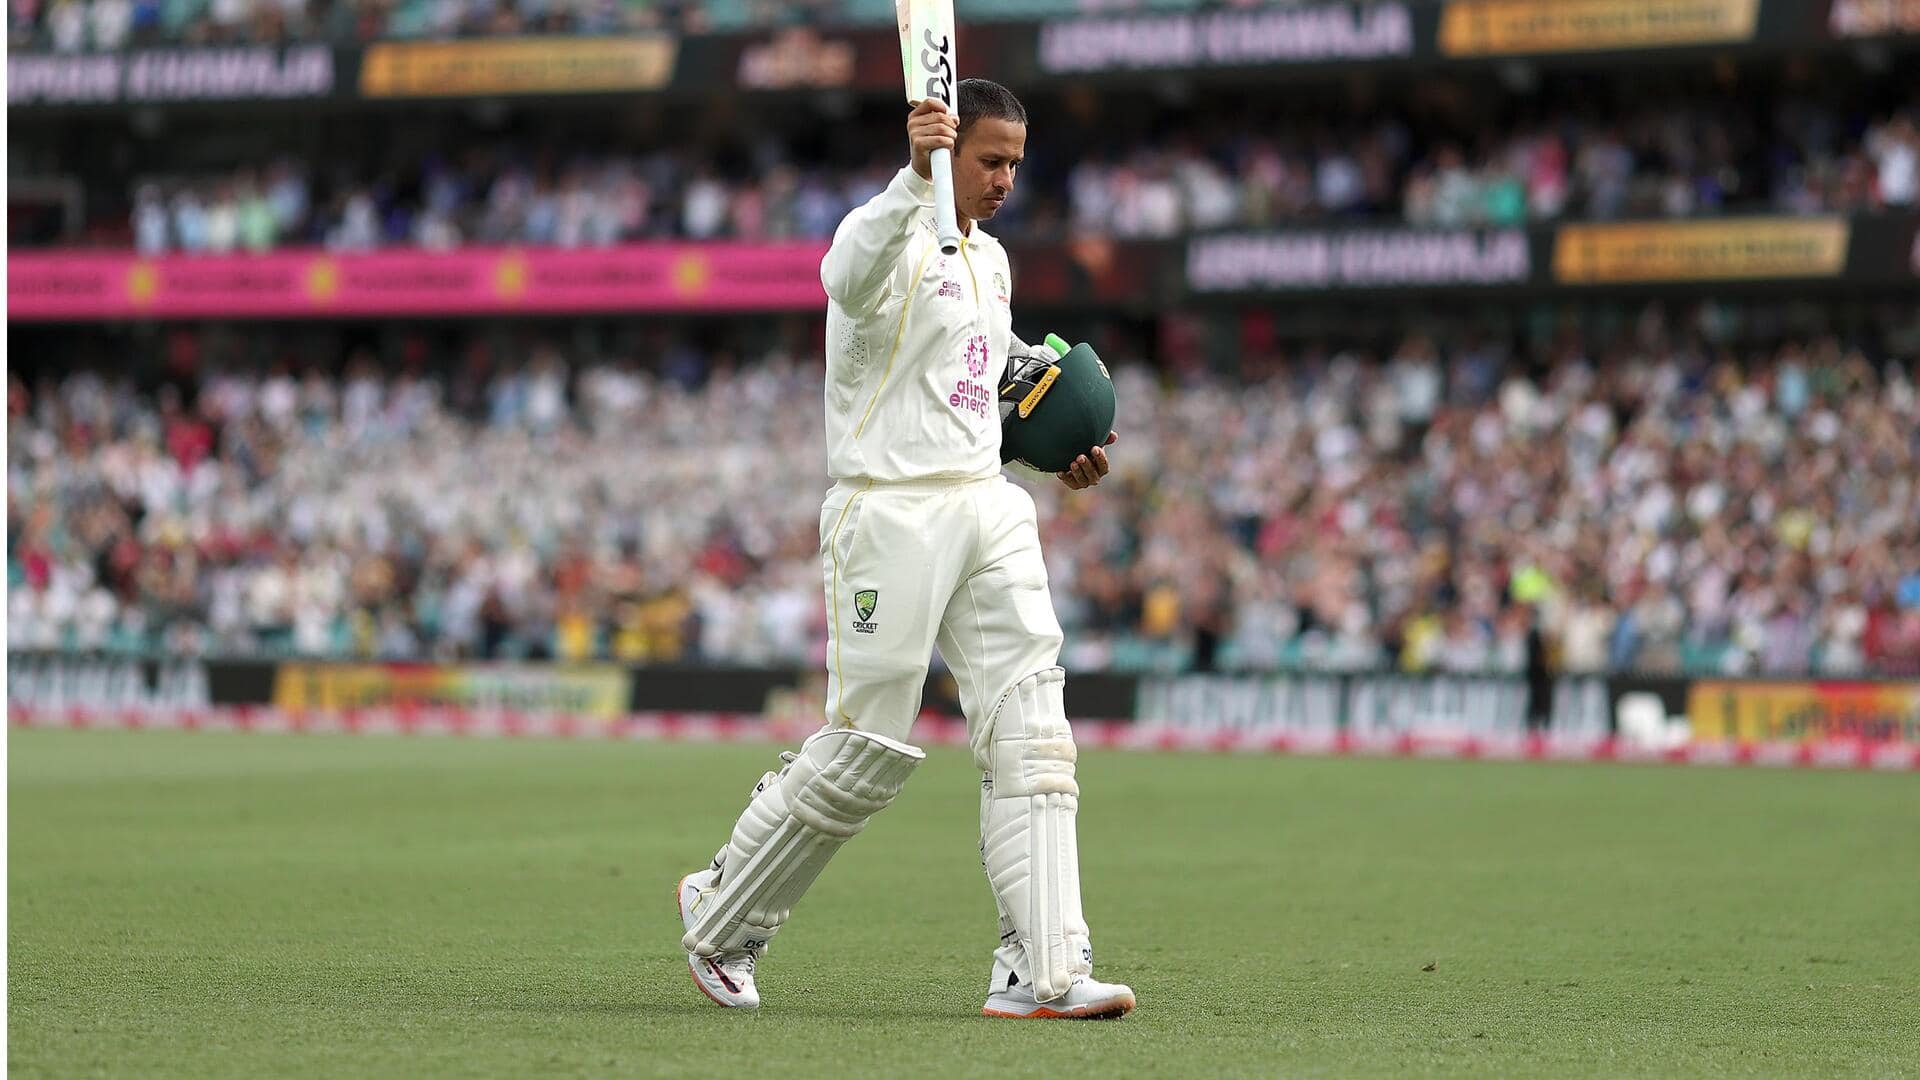 Usman Khawaja named ICC Test Cricketer of the Year (2023)